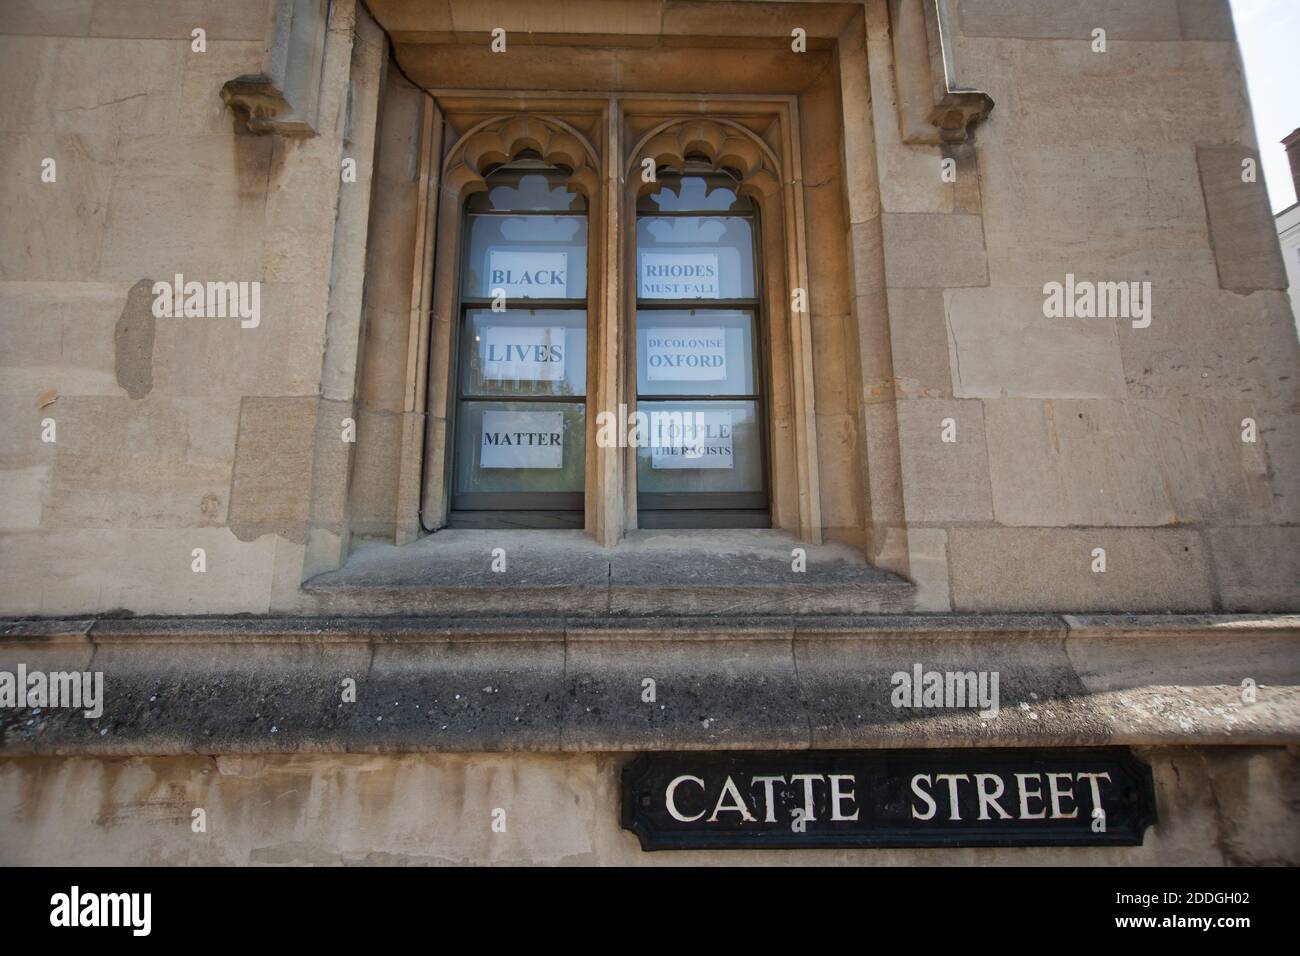 A Black Lives Matter sign mentioning Rhodes must fall on Catte Street in Oxford in the UK, taken on the 15th of September 2020 Stock Photo